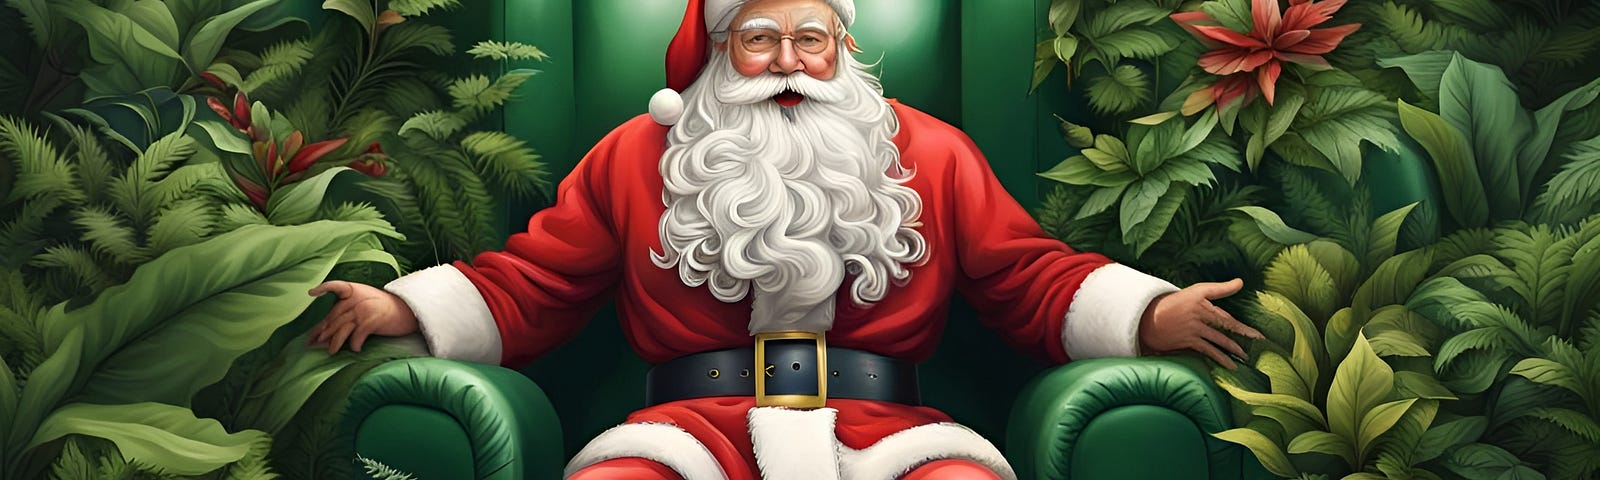 Cartoon of Santa Claus sitting in a green chair surrounded by earth-friendly jungle plants